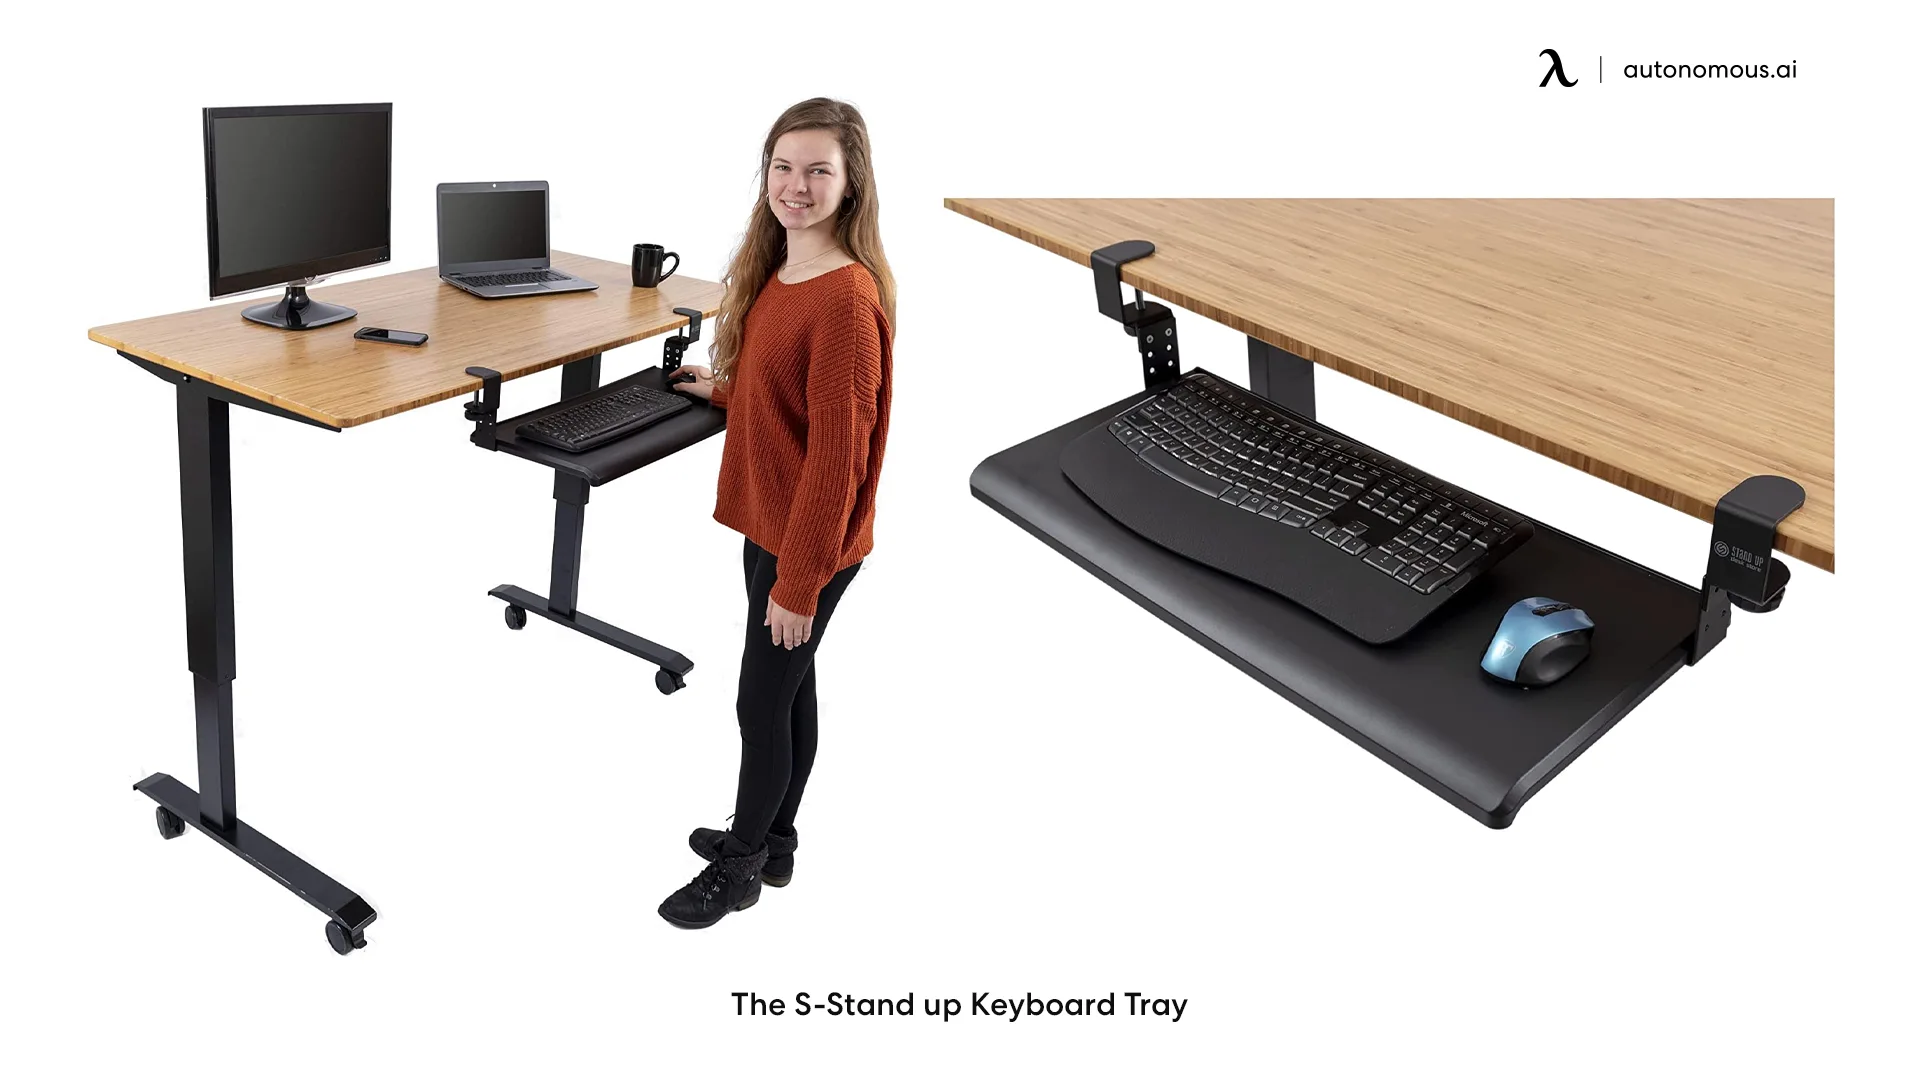 The S-Stand up adjustable keyboard tray